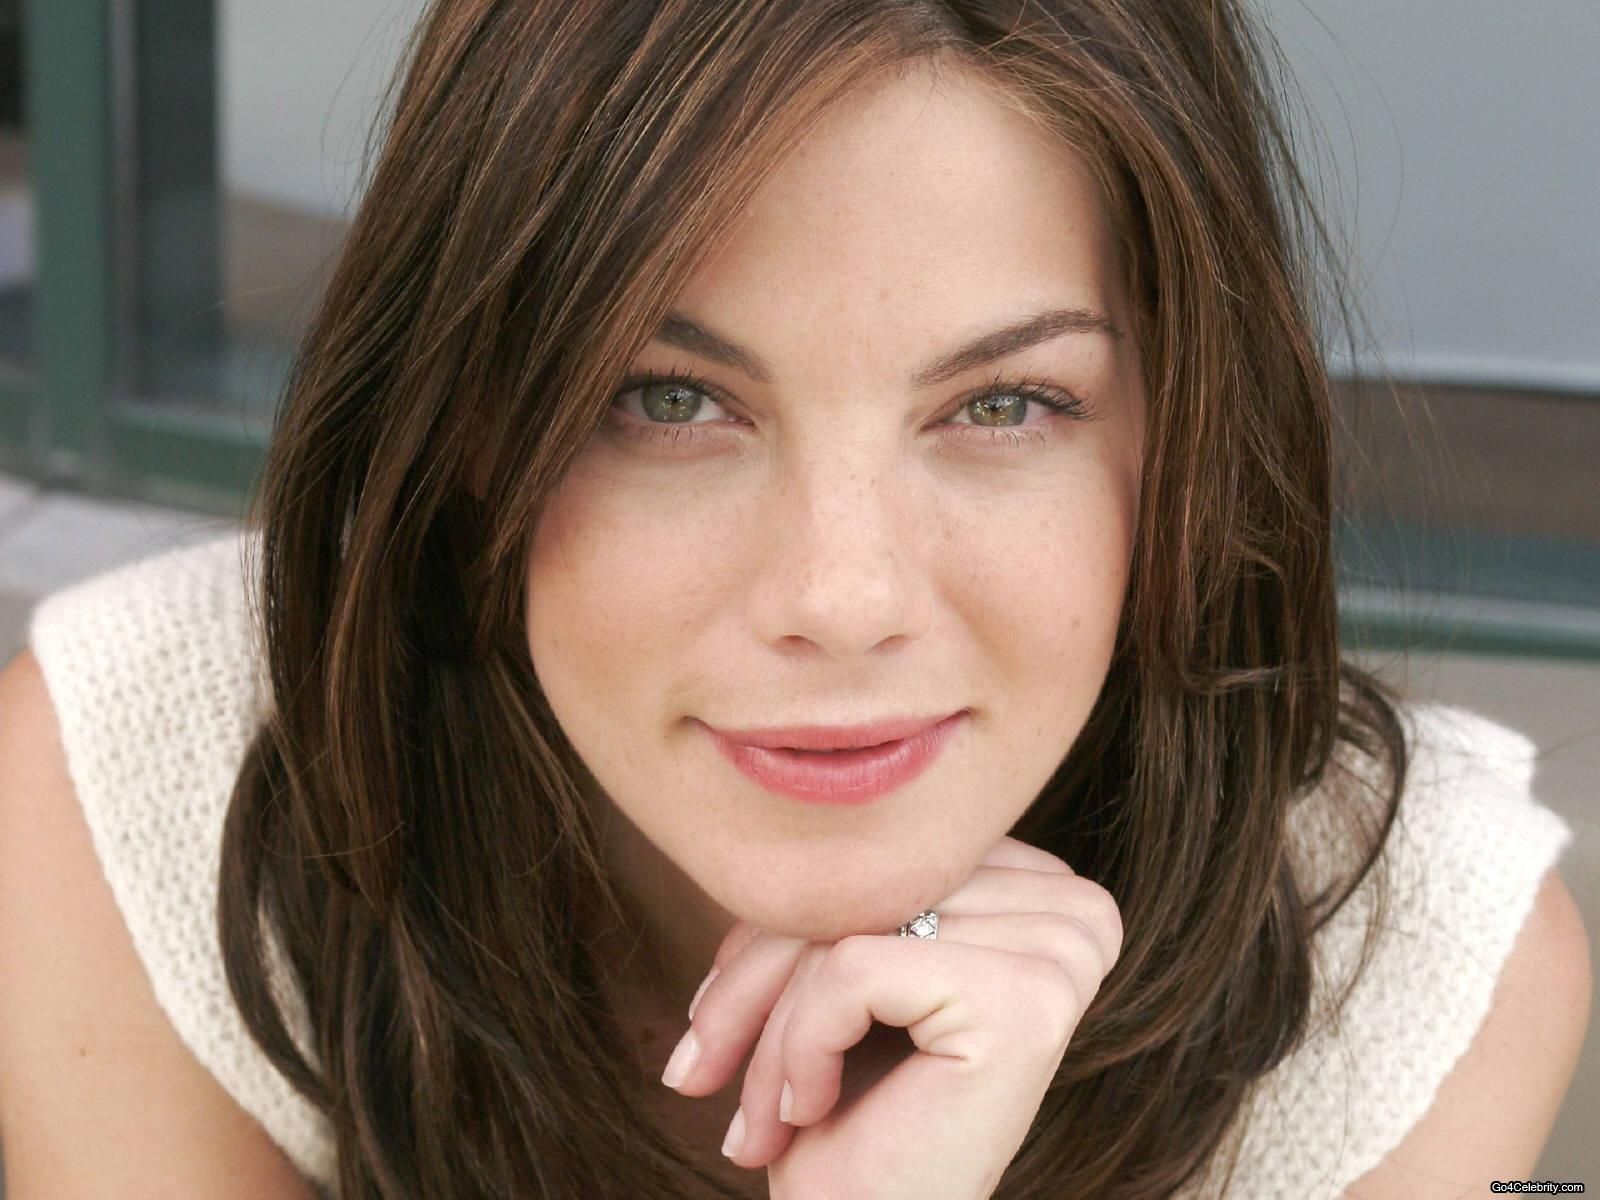 Monaghan body michelle Michelle Monaghan's